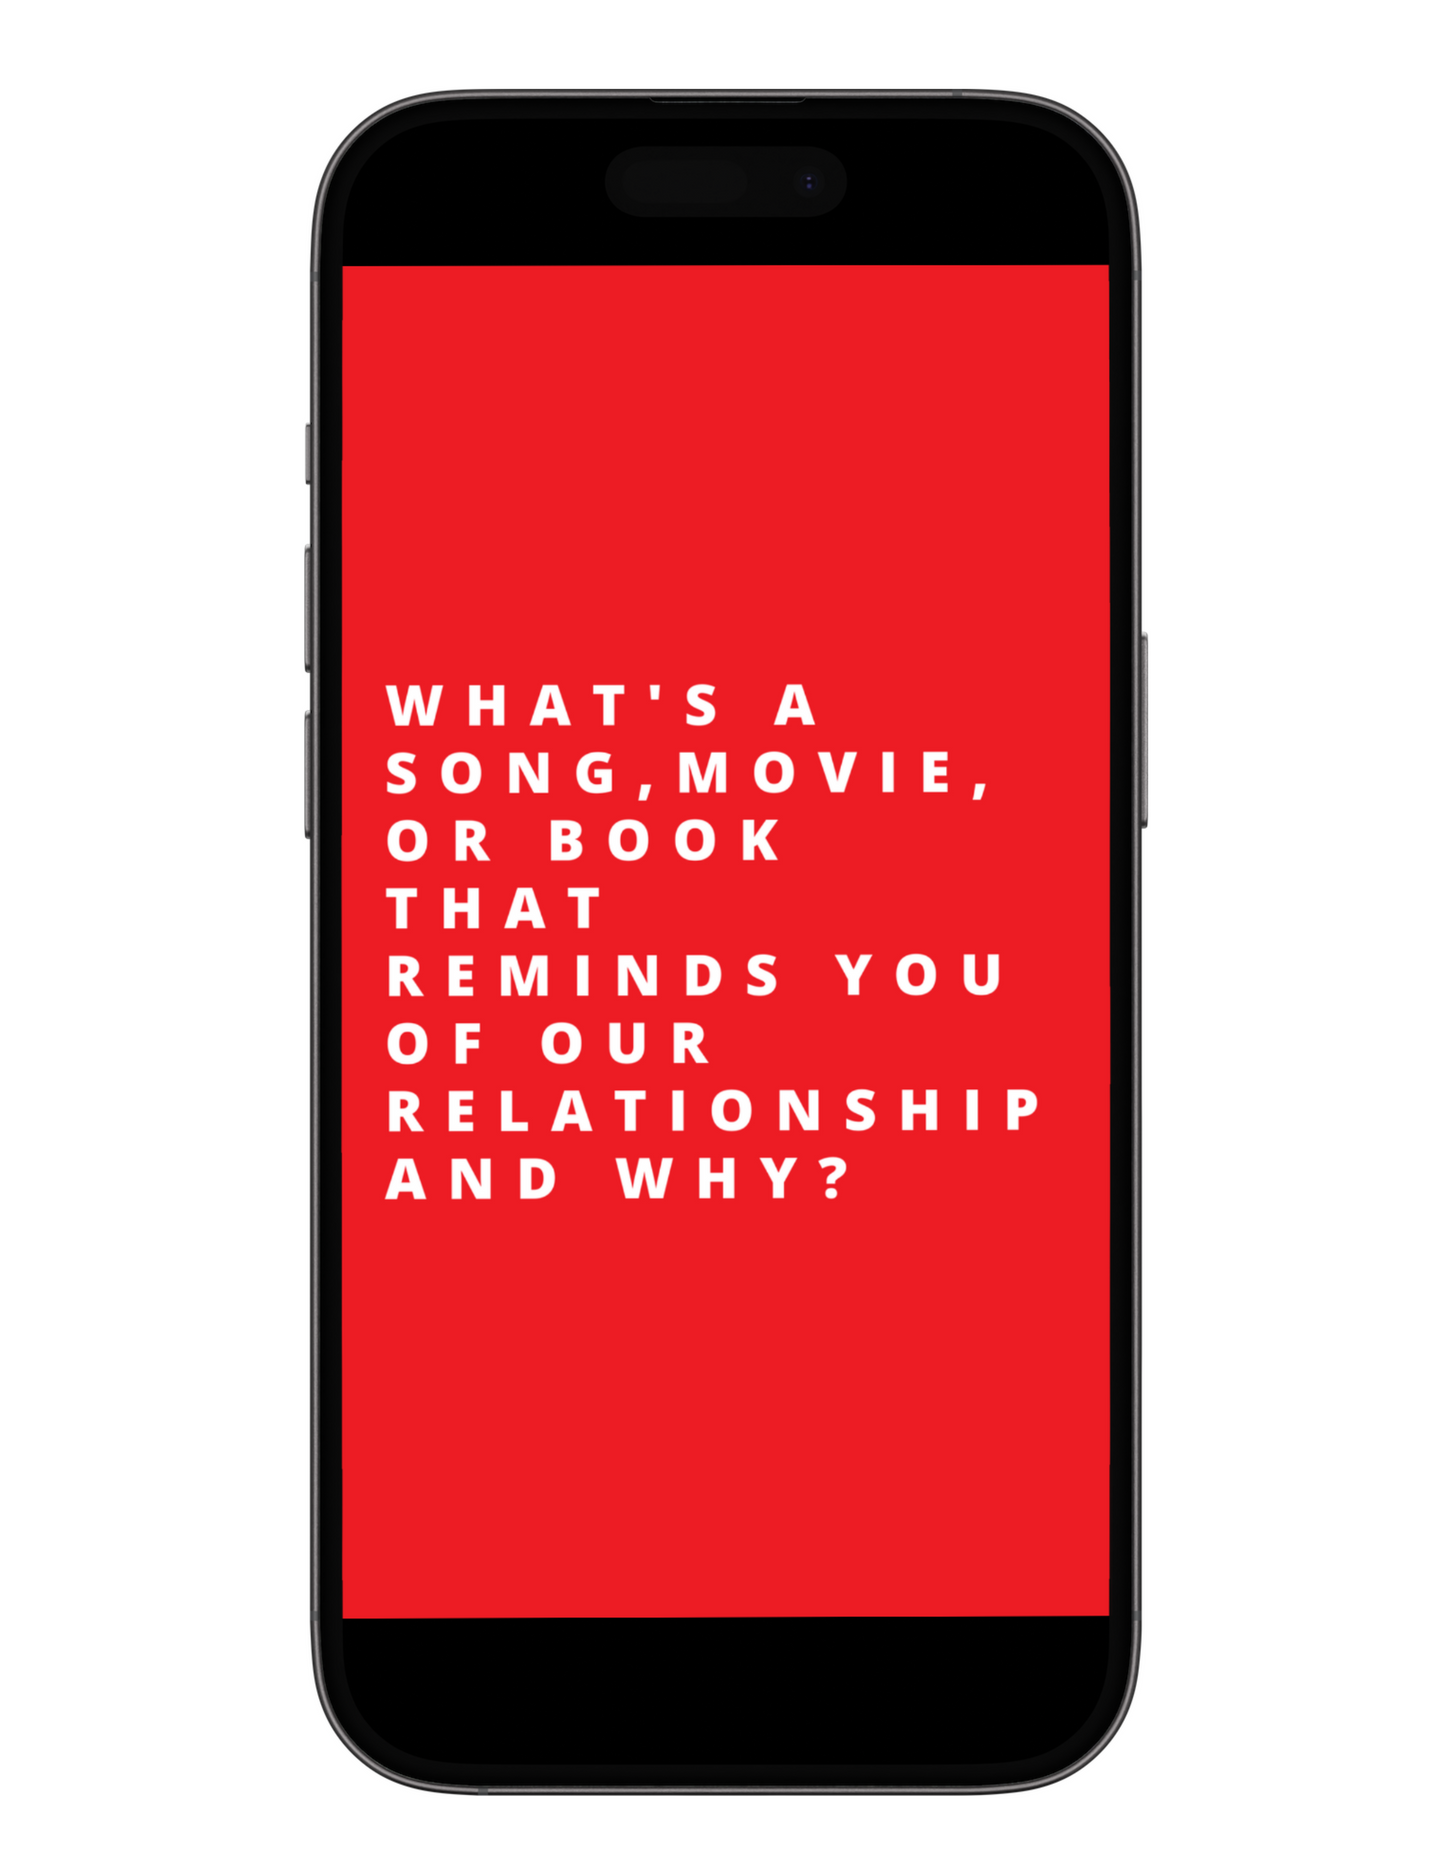 52 Questions to Spark Intimacy Mobile E-book